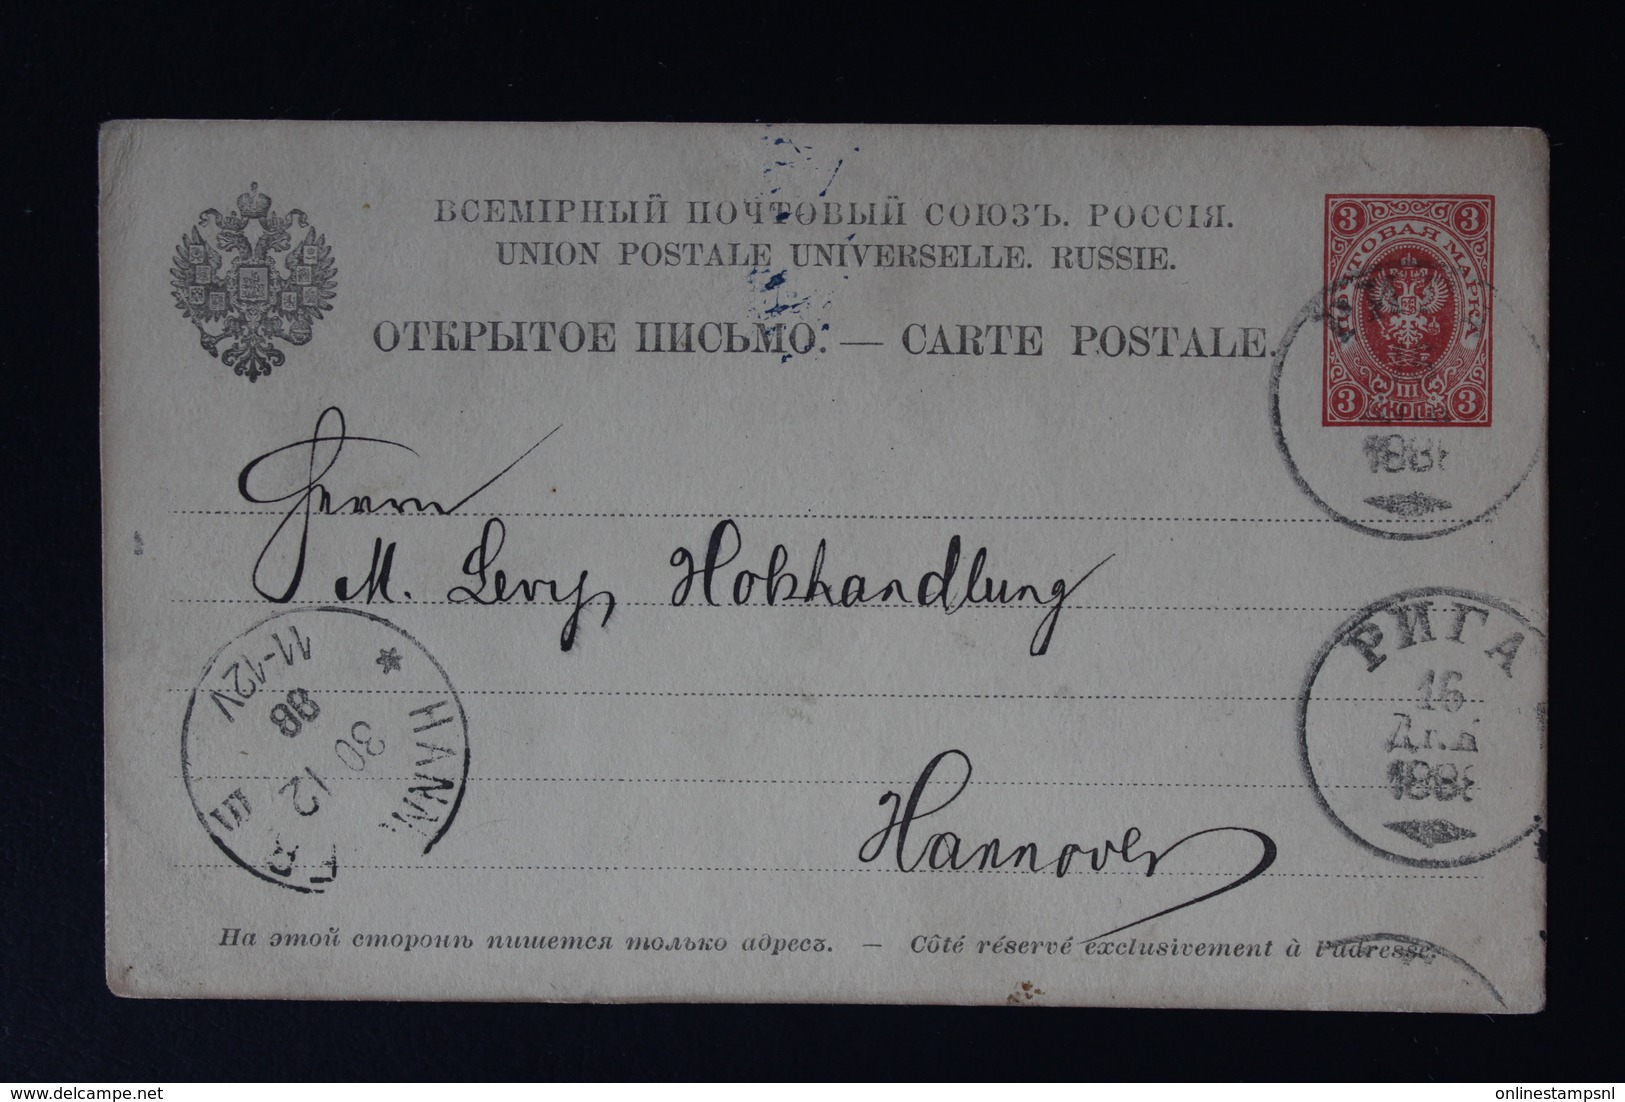 RUSSIA POSTCARD RIGA TO HANNOVER 1888  P7 - Entiers Postaux